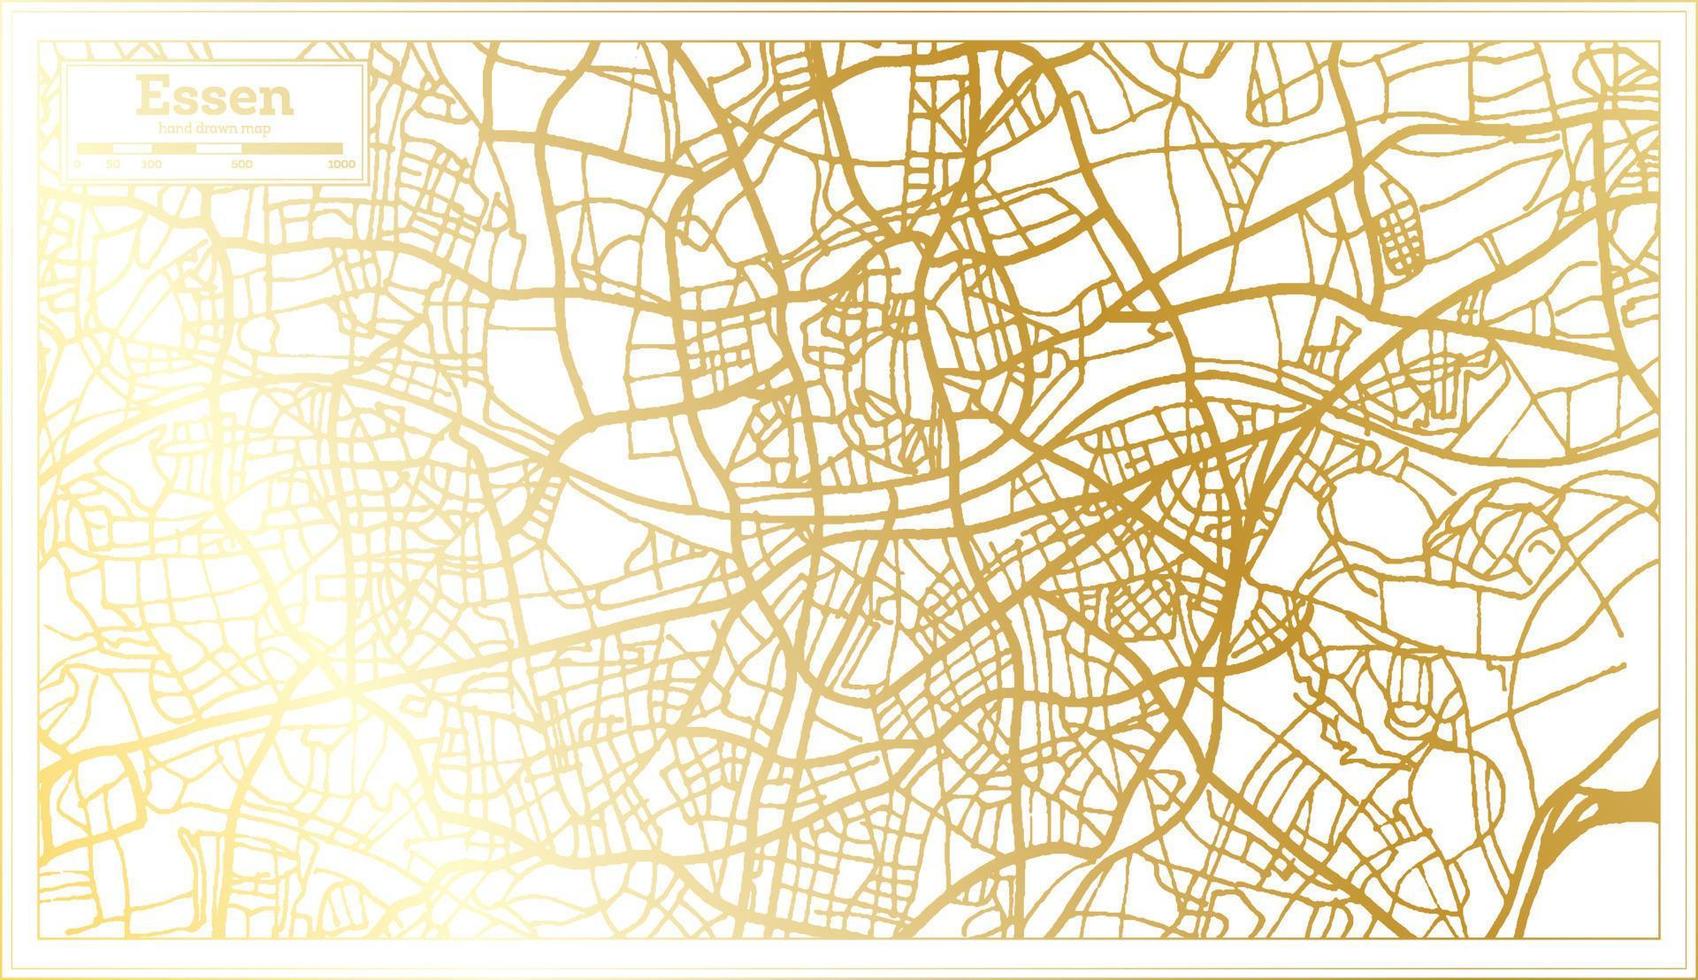 Essen Germany City Map in Retro Style in Golden Color. Outline Map. vector